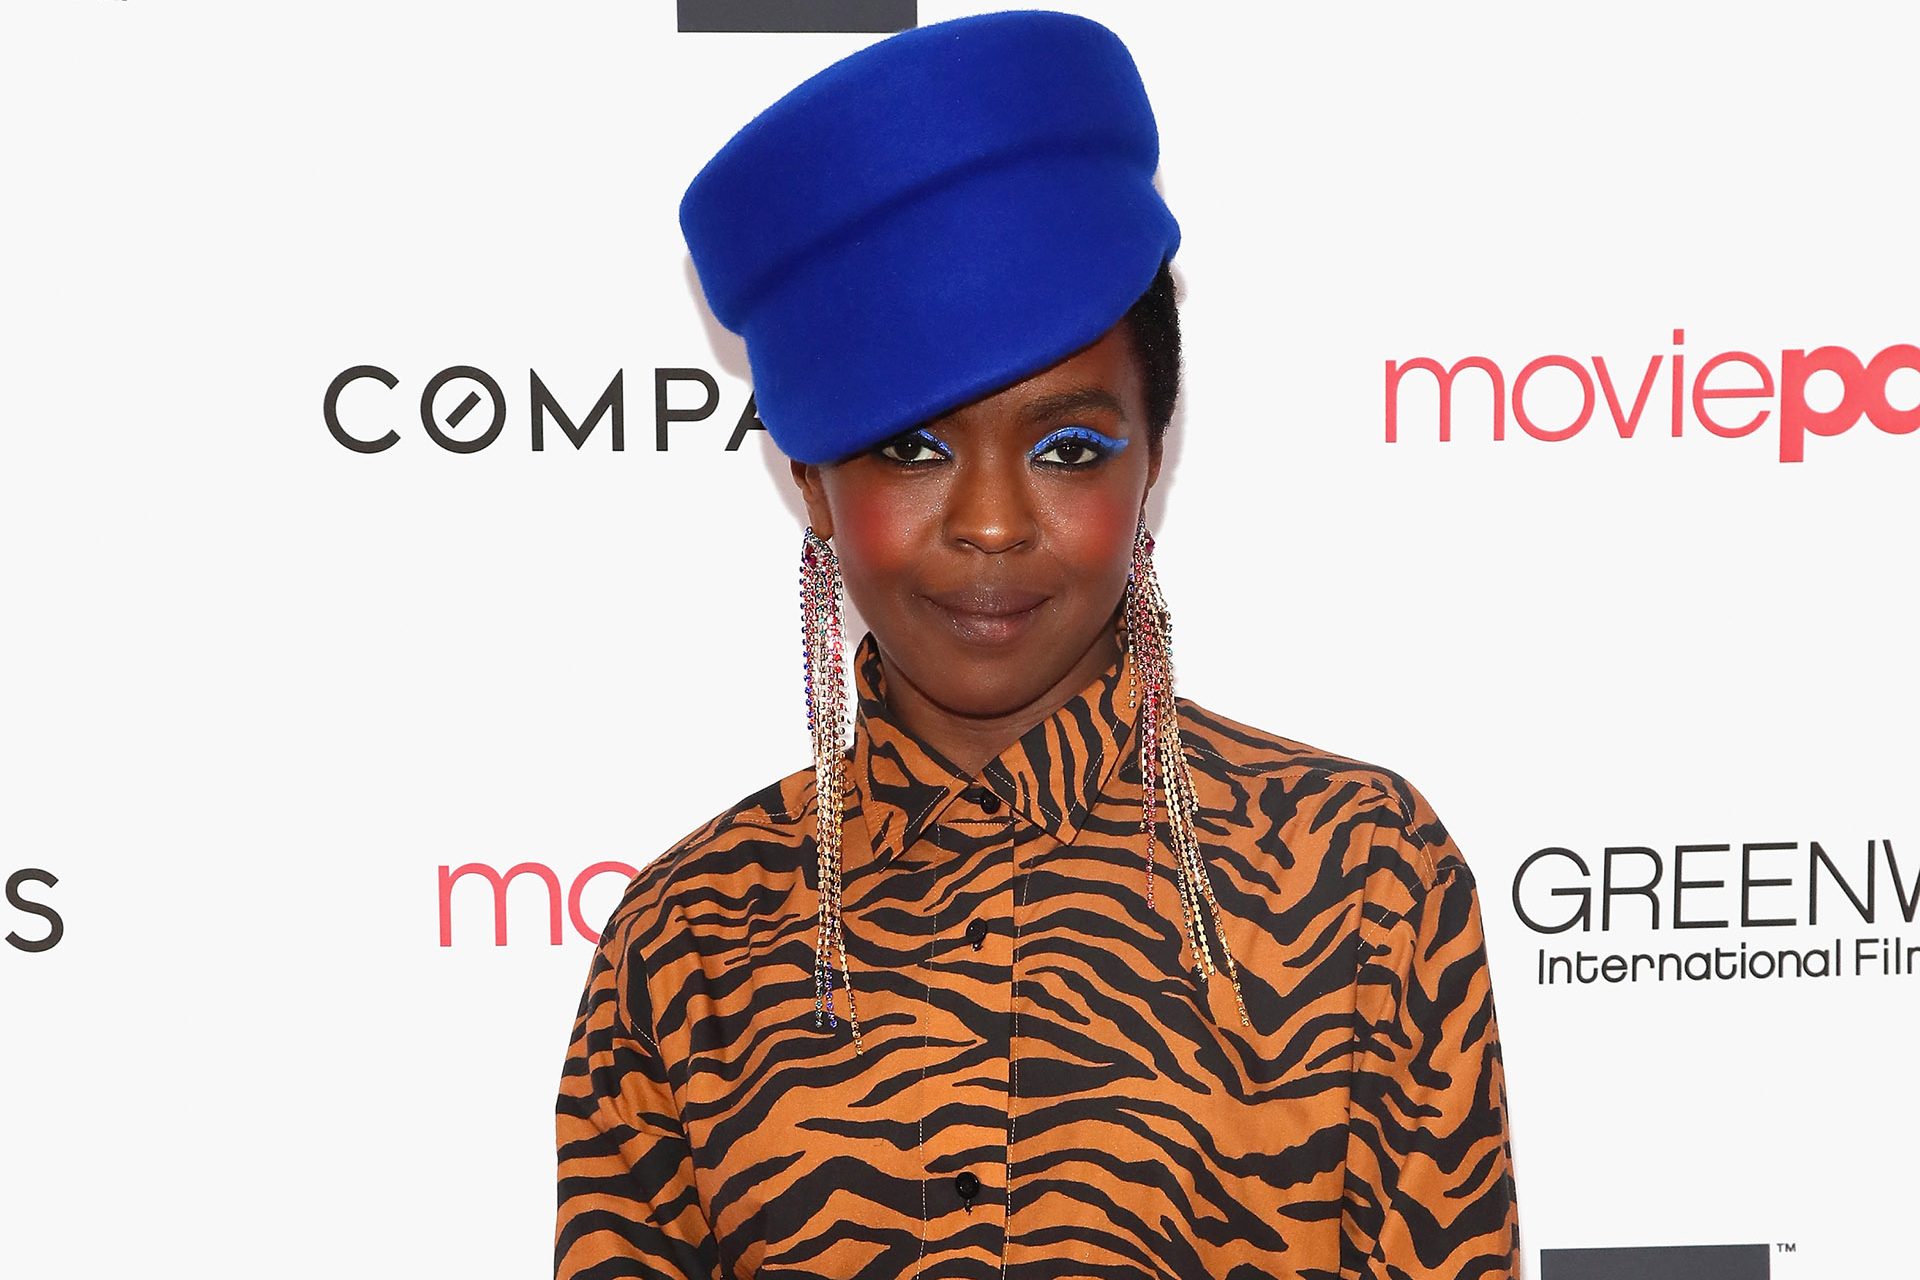 <p>In 2018, she launched a 20th-anniversary tour for 'The Miseducation Of Lauryn Hill', which brought her back into the limelight but was tarnished by plagiarism accusations by pianist, composer, and producer Robert Glasper, who also criticized her treatment of musicians she worked with.</p>